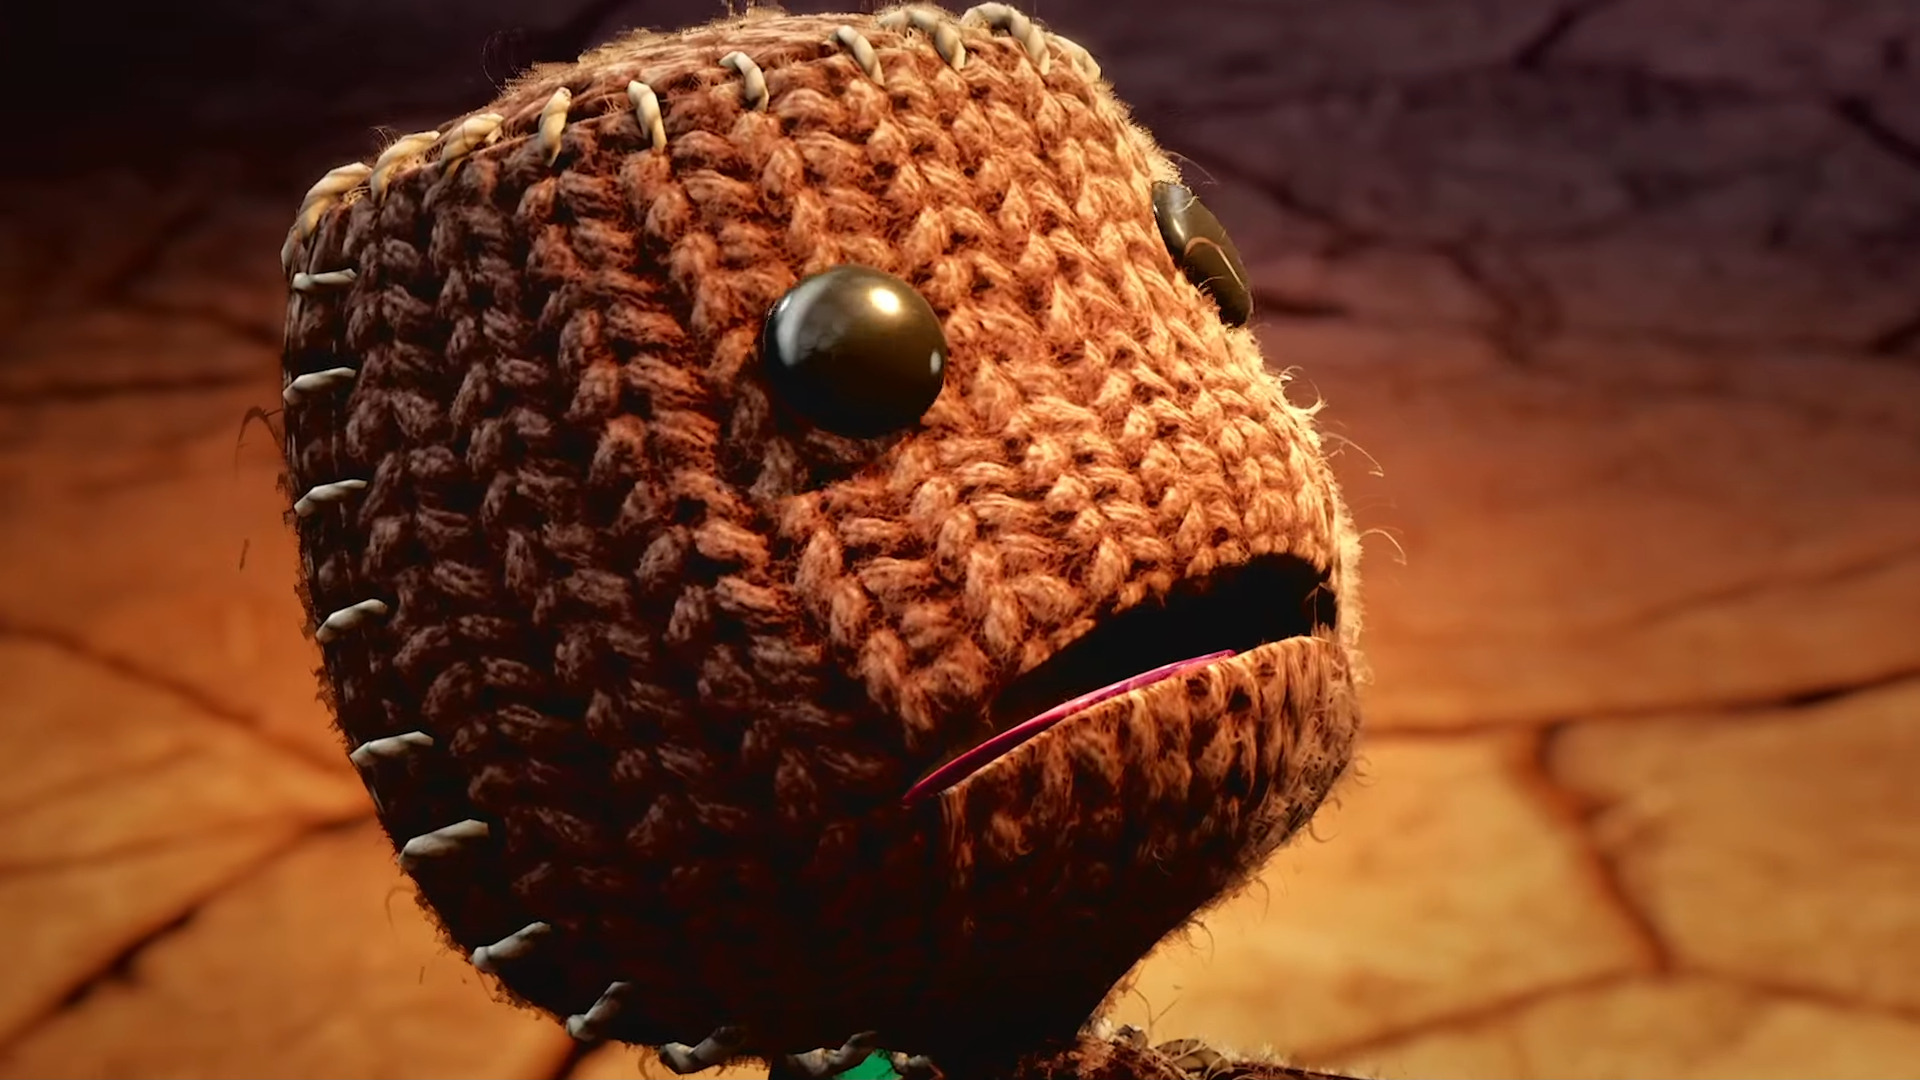 PlayStation Studios Released The Story Trailer For Sackboy: A Big Adventure